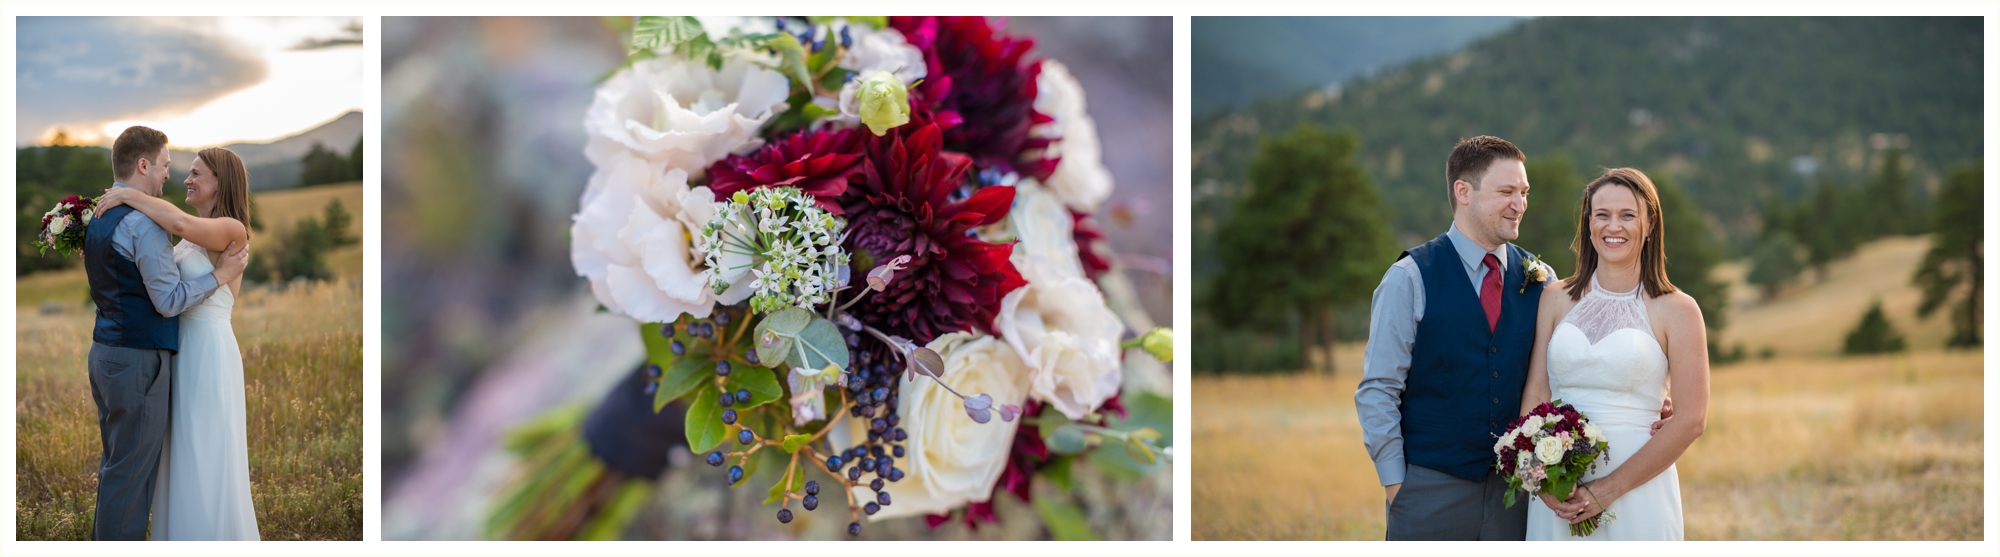 candid couples portraits just married in boulder colorado at betasso preserve in the mountains